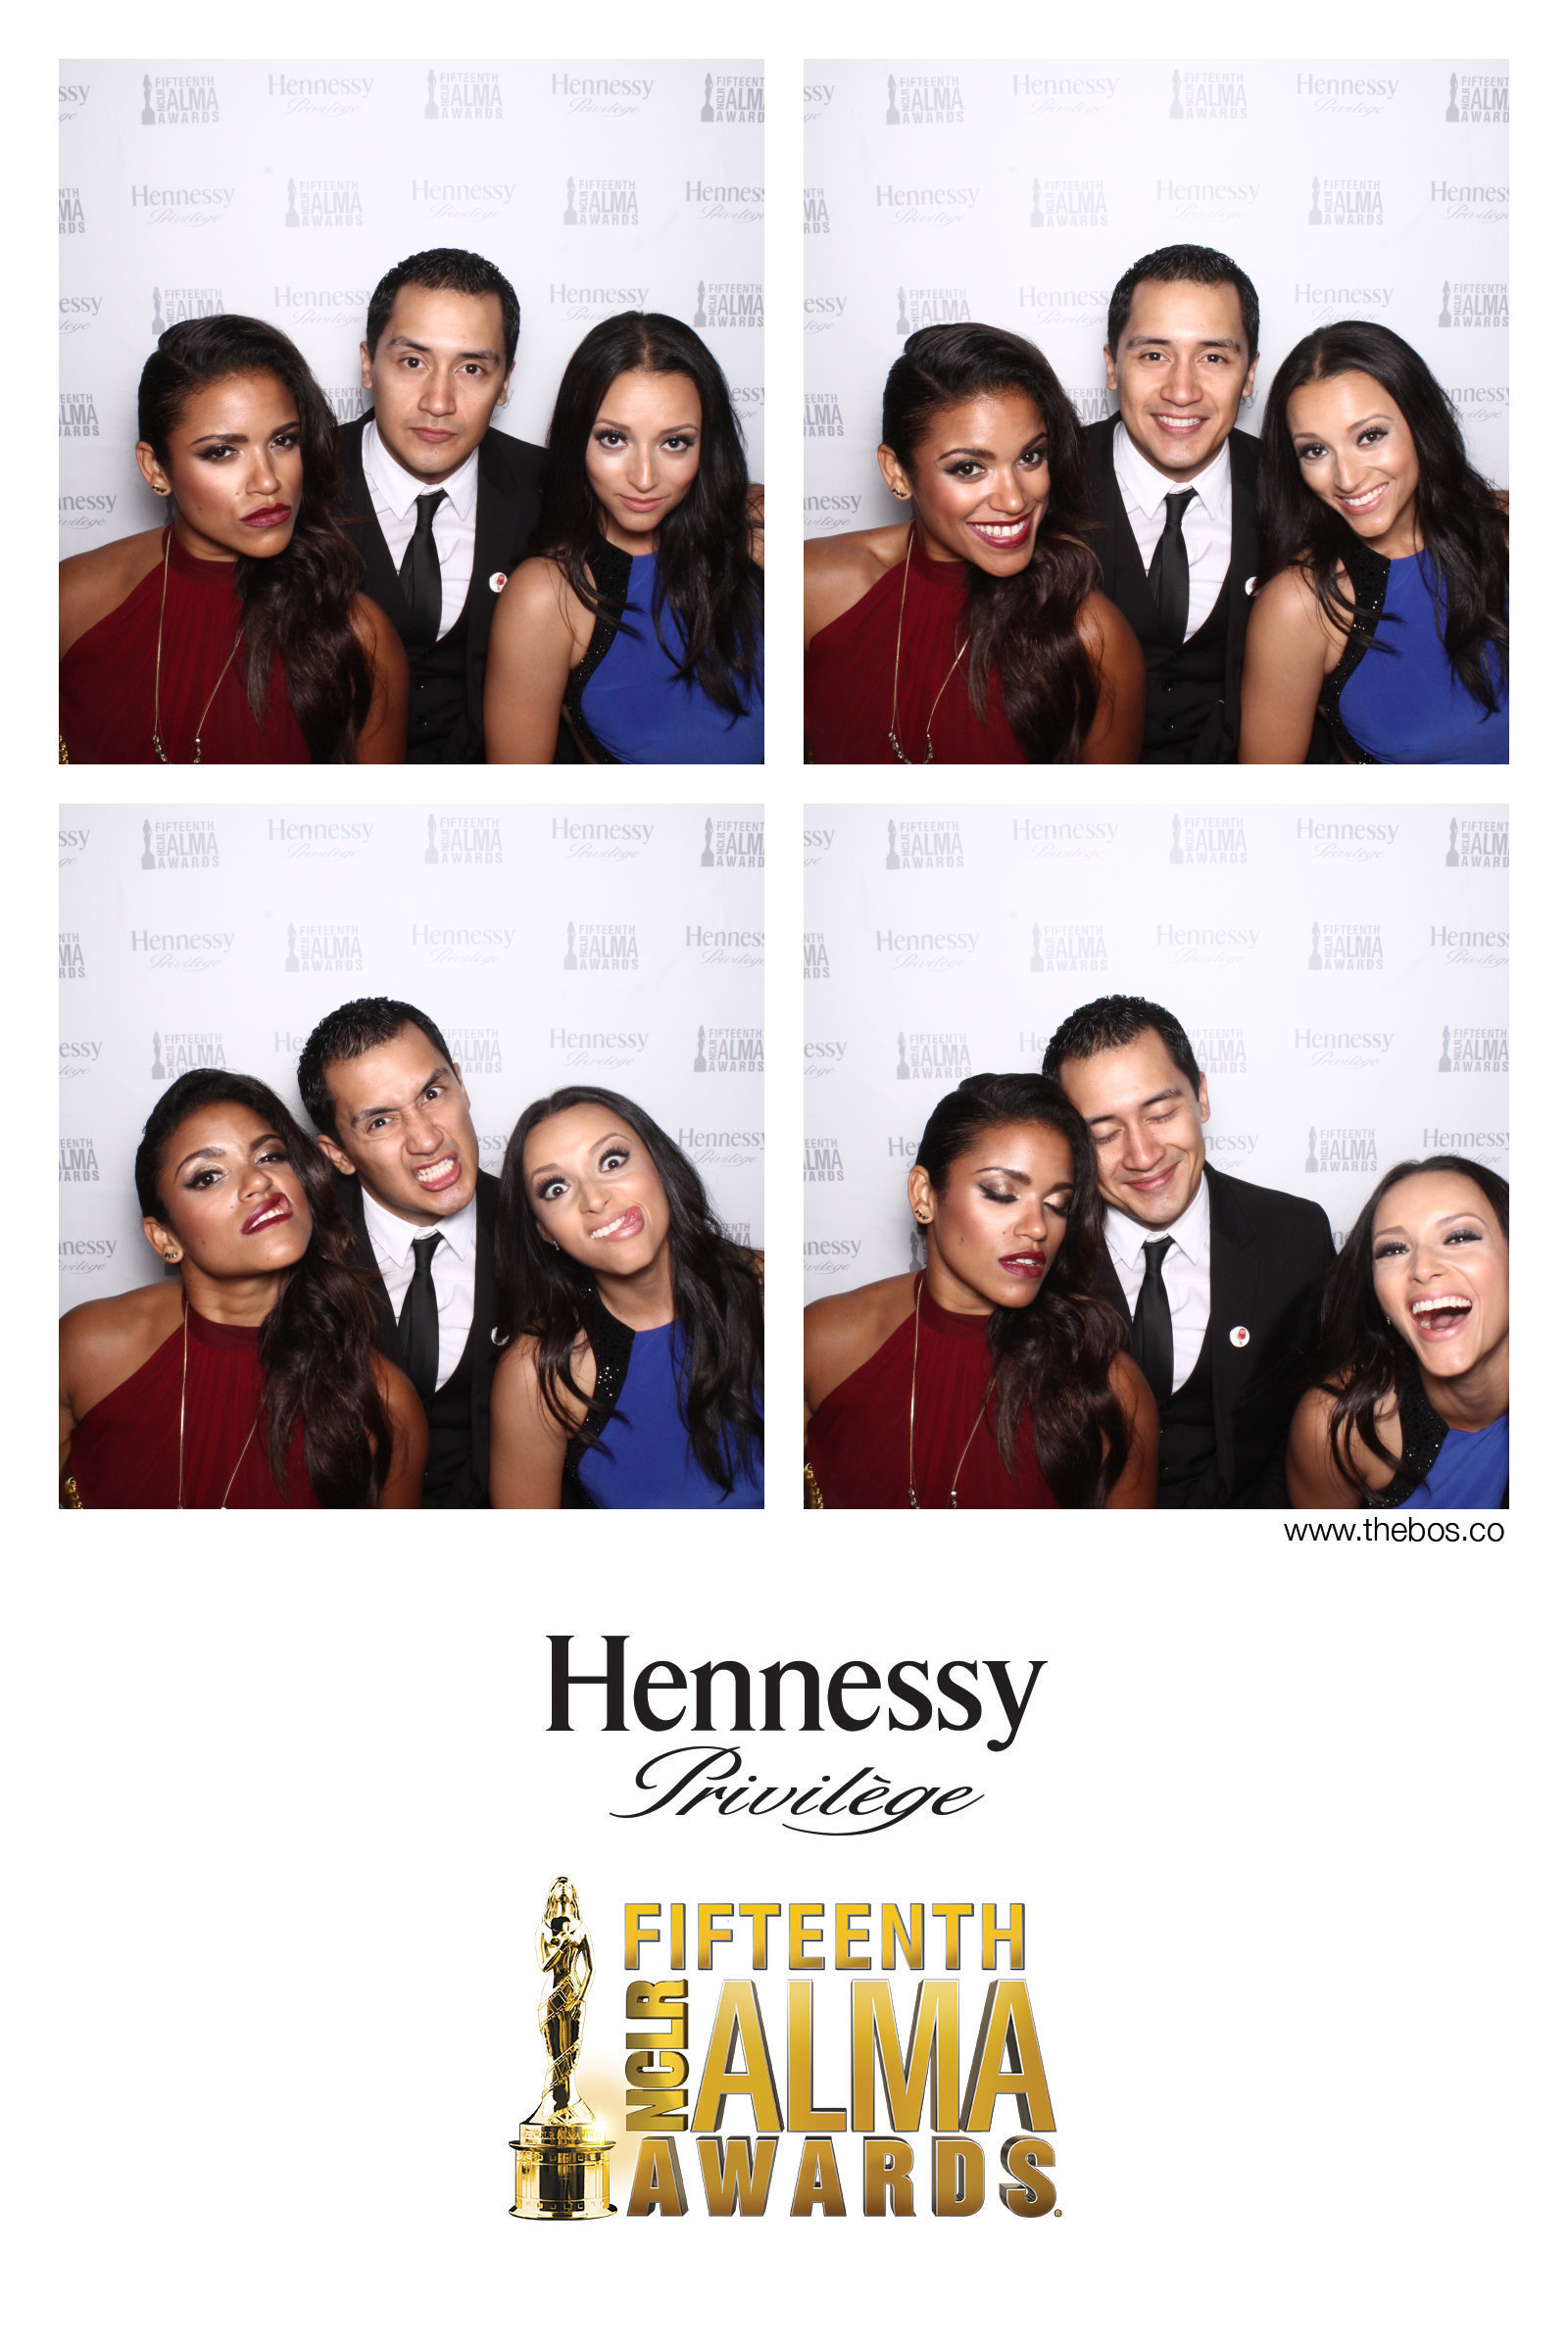 Vivian Lamolli, Rick Mancia, and Danielle Vega attend the 2014 NCLR ALMA Awards Producer's Post Party Hosted by Hennessy